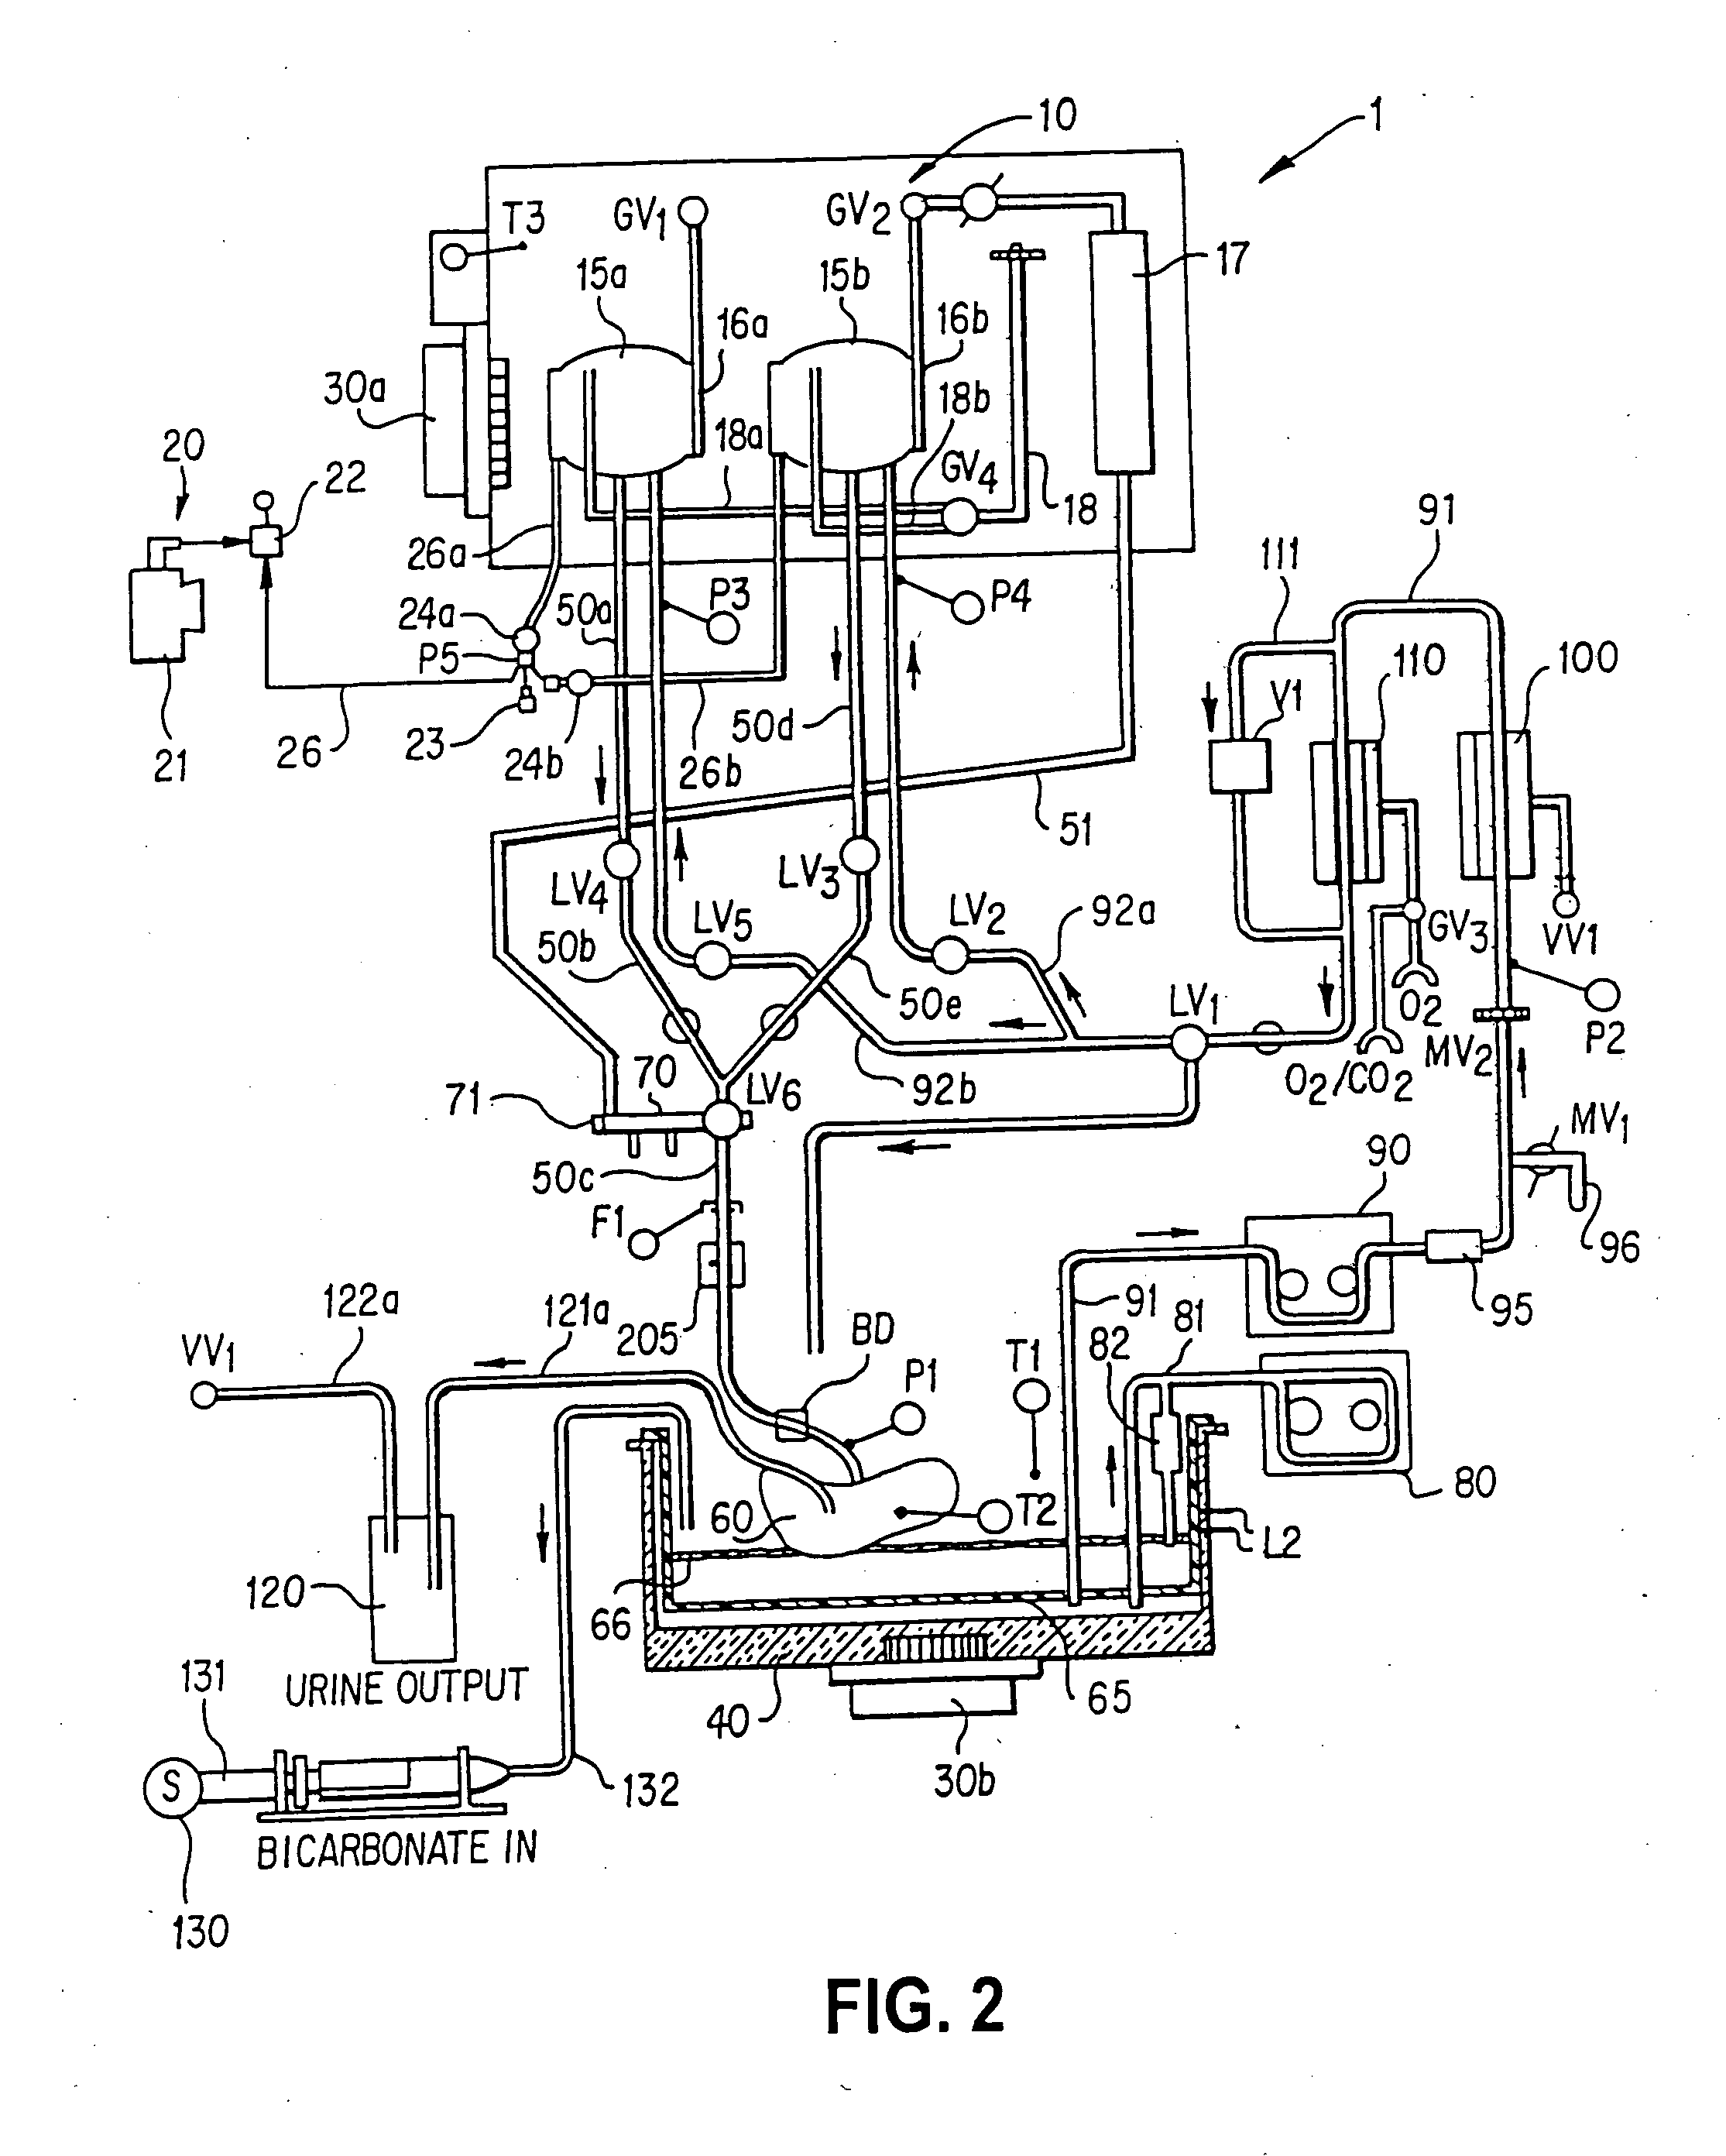 Apparatus and method for perfusing an organ or tissue for isolating cells from the organ or tissue